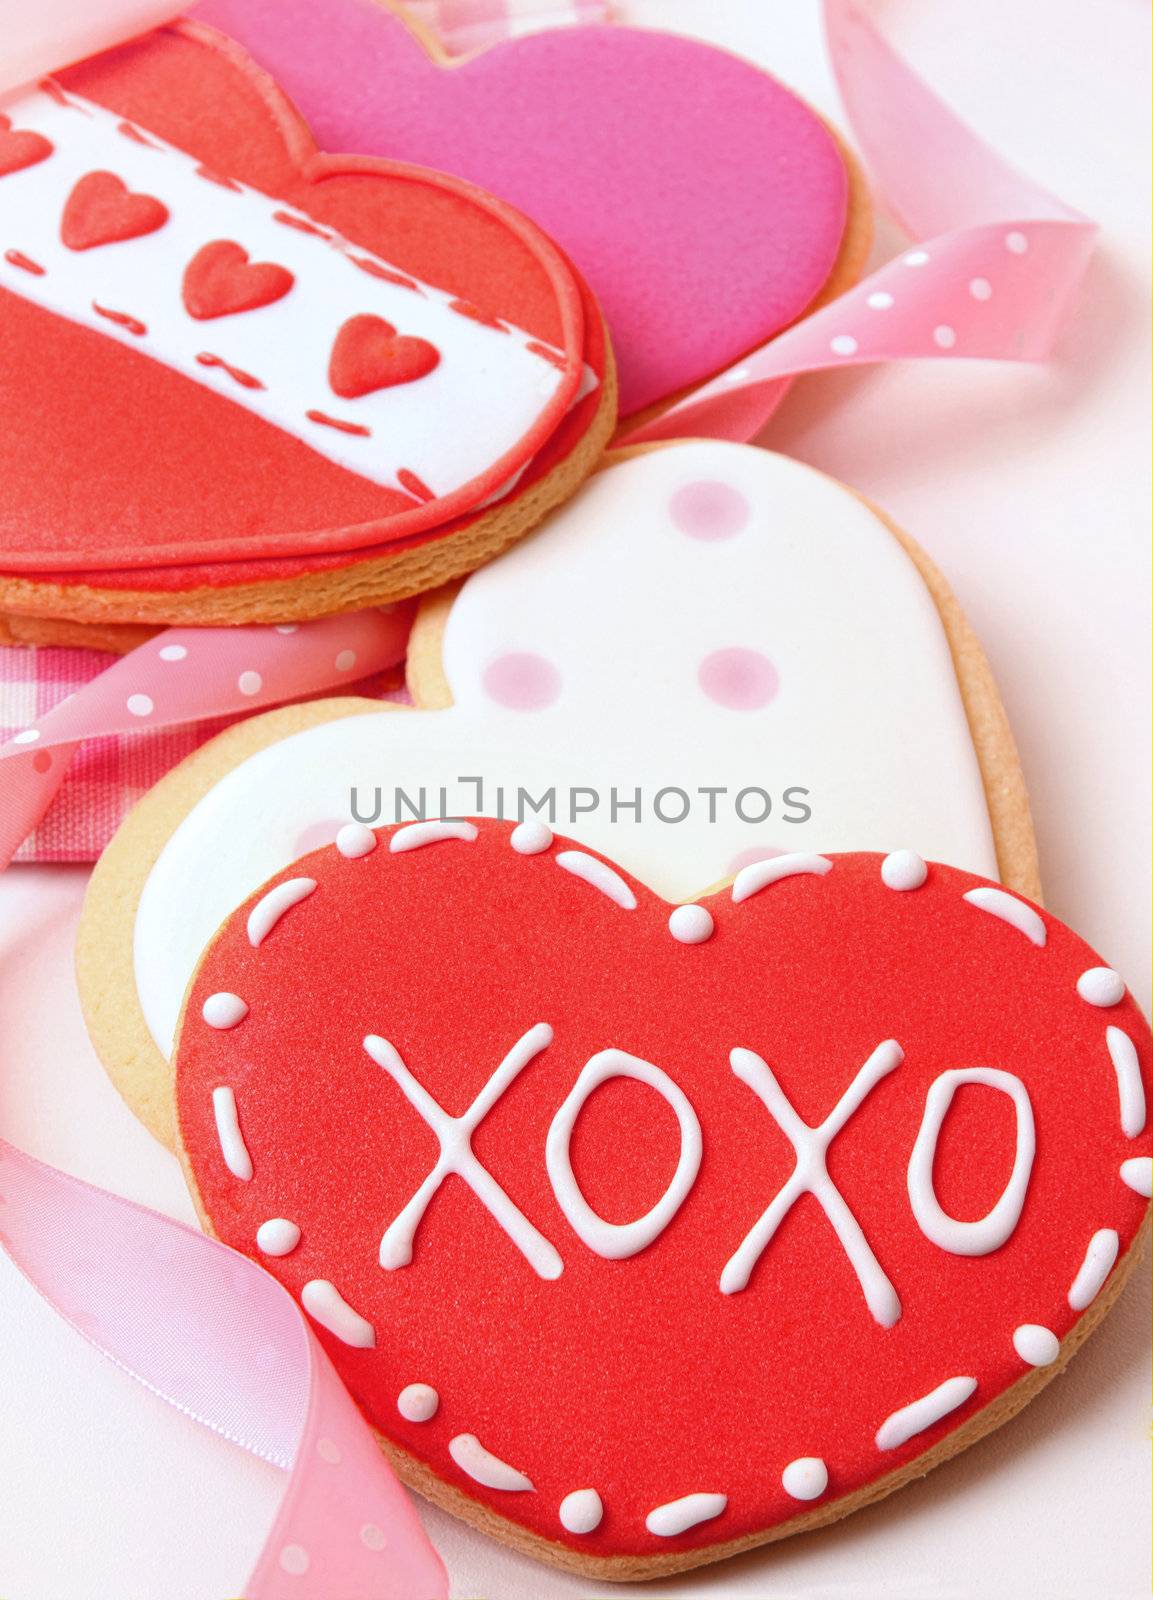 Heart-shape cookies for Valentine's Day  by Sandralise